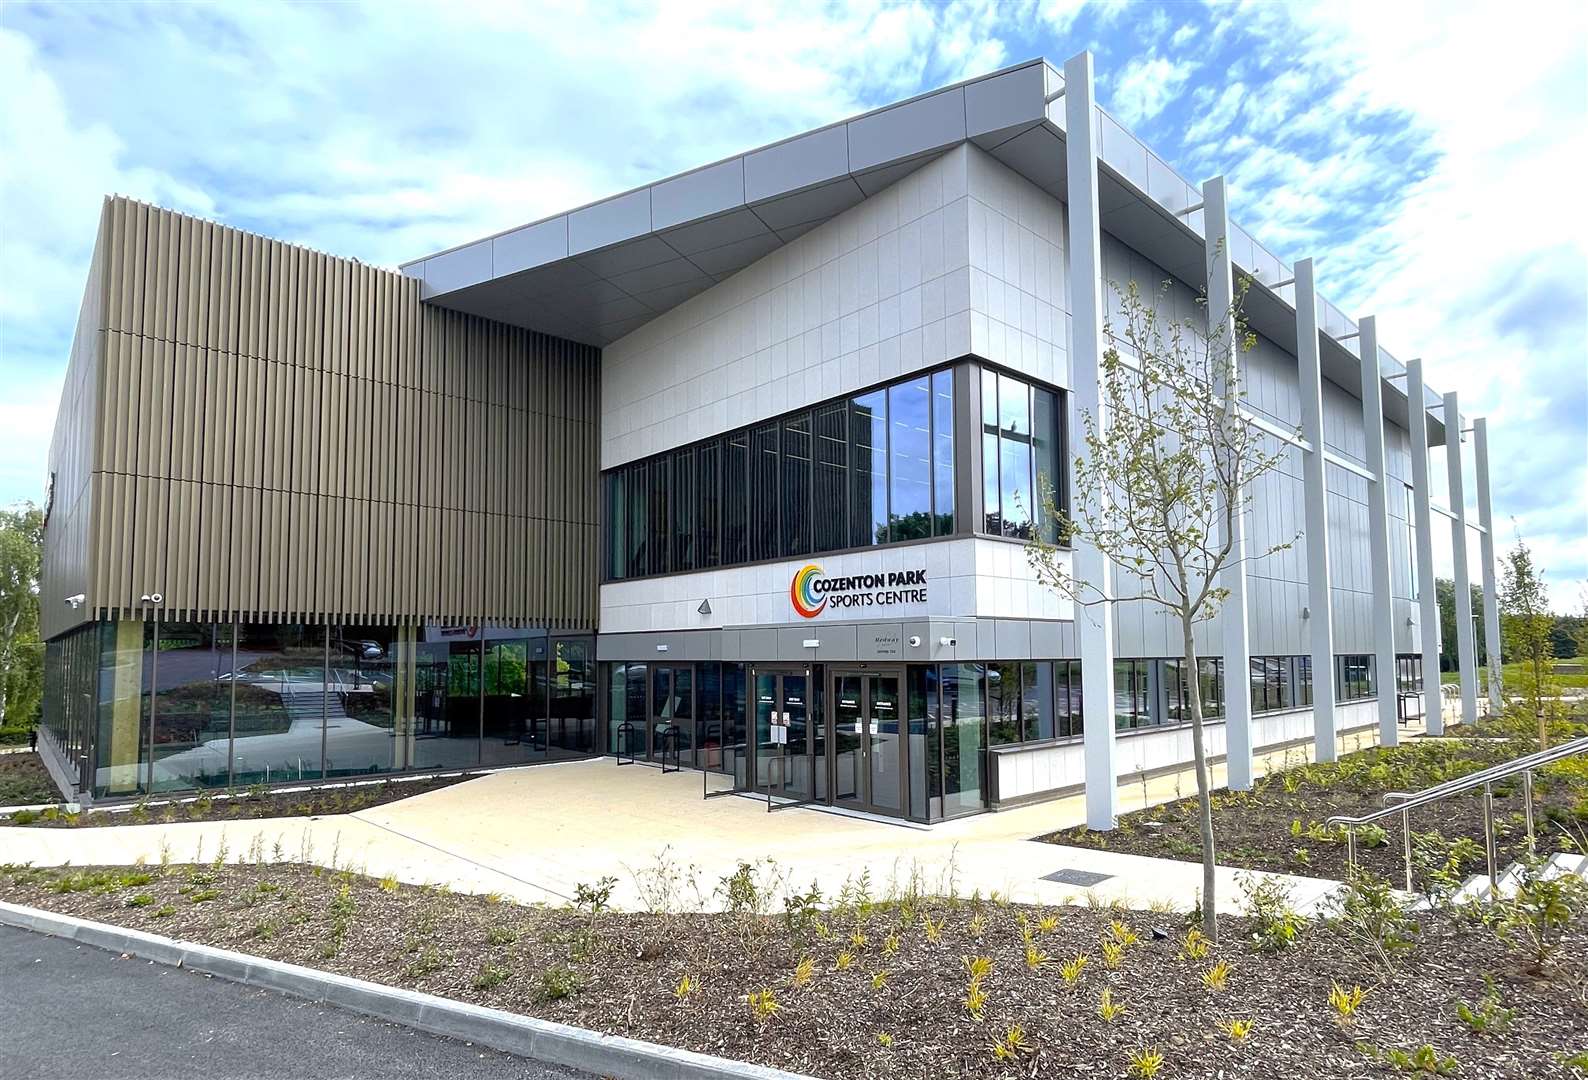 The Cozenton Park Sports Centre will open to the general public on July 17. Photo: Phil Drew.